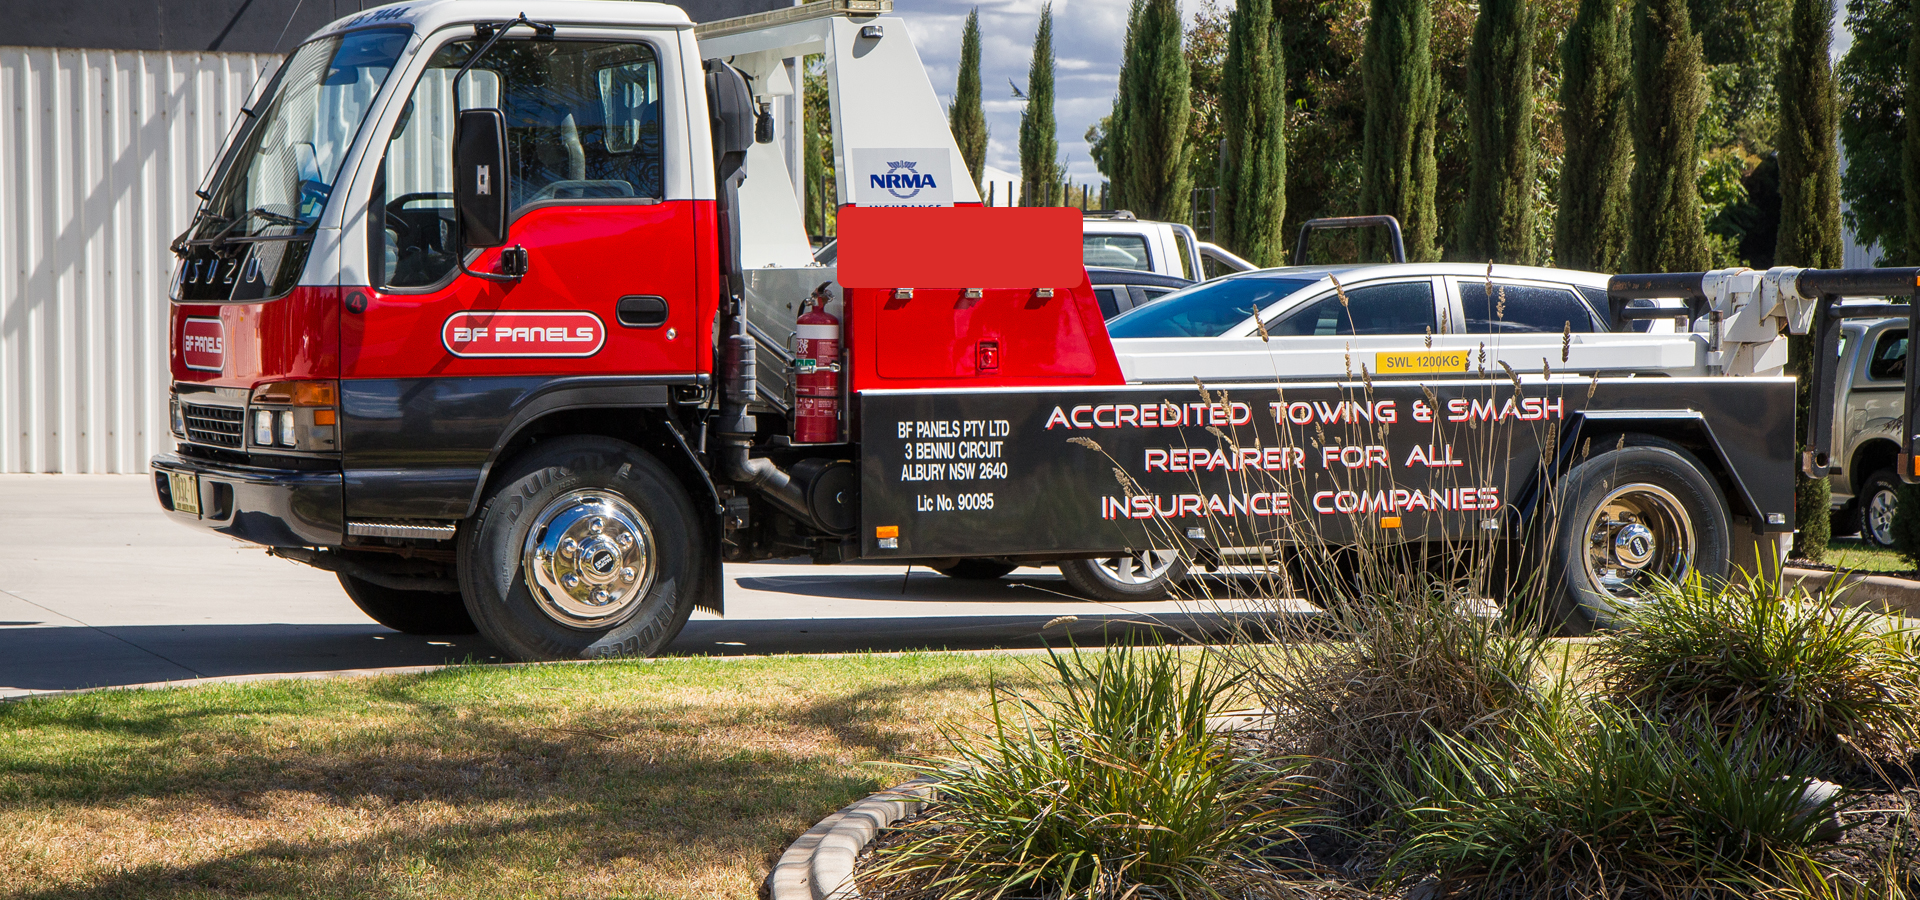 What to do when you are in need of emergency towing service?